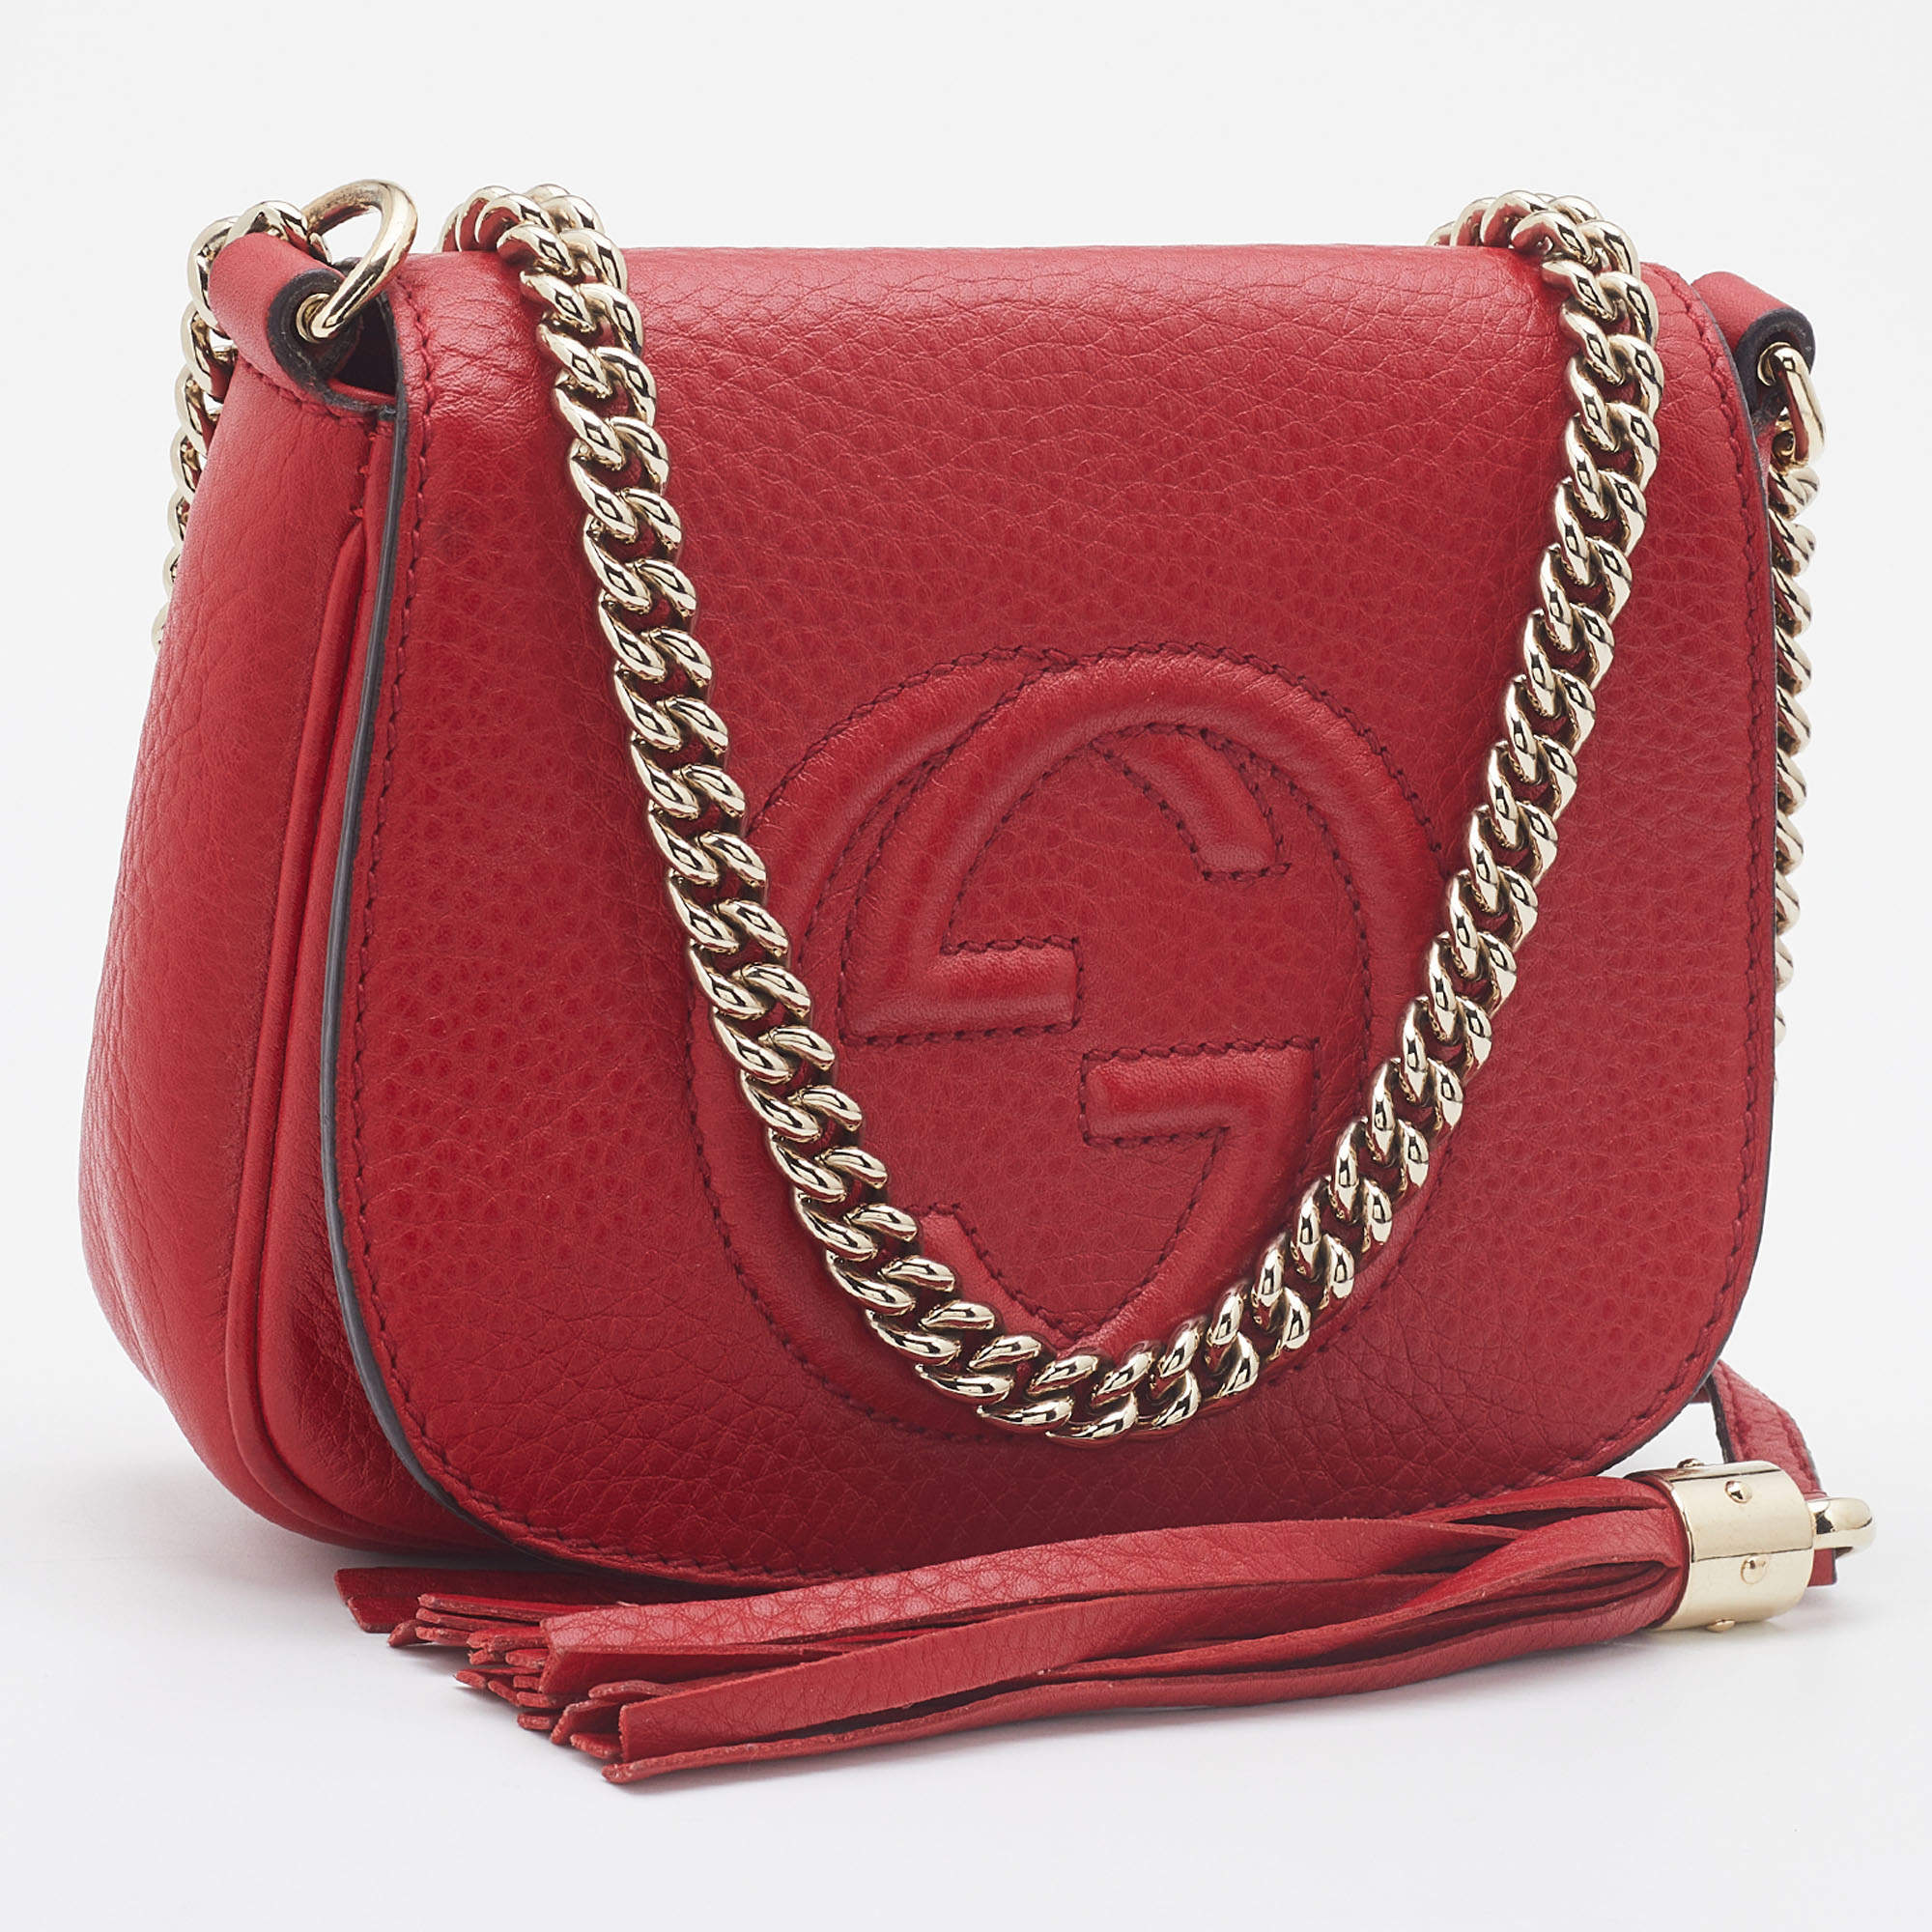 Soho leather handbag Gucci Red in Leather - 24128945